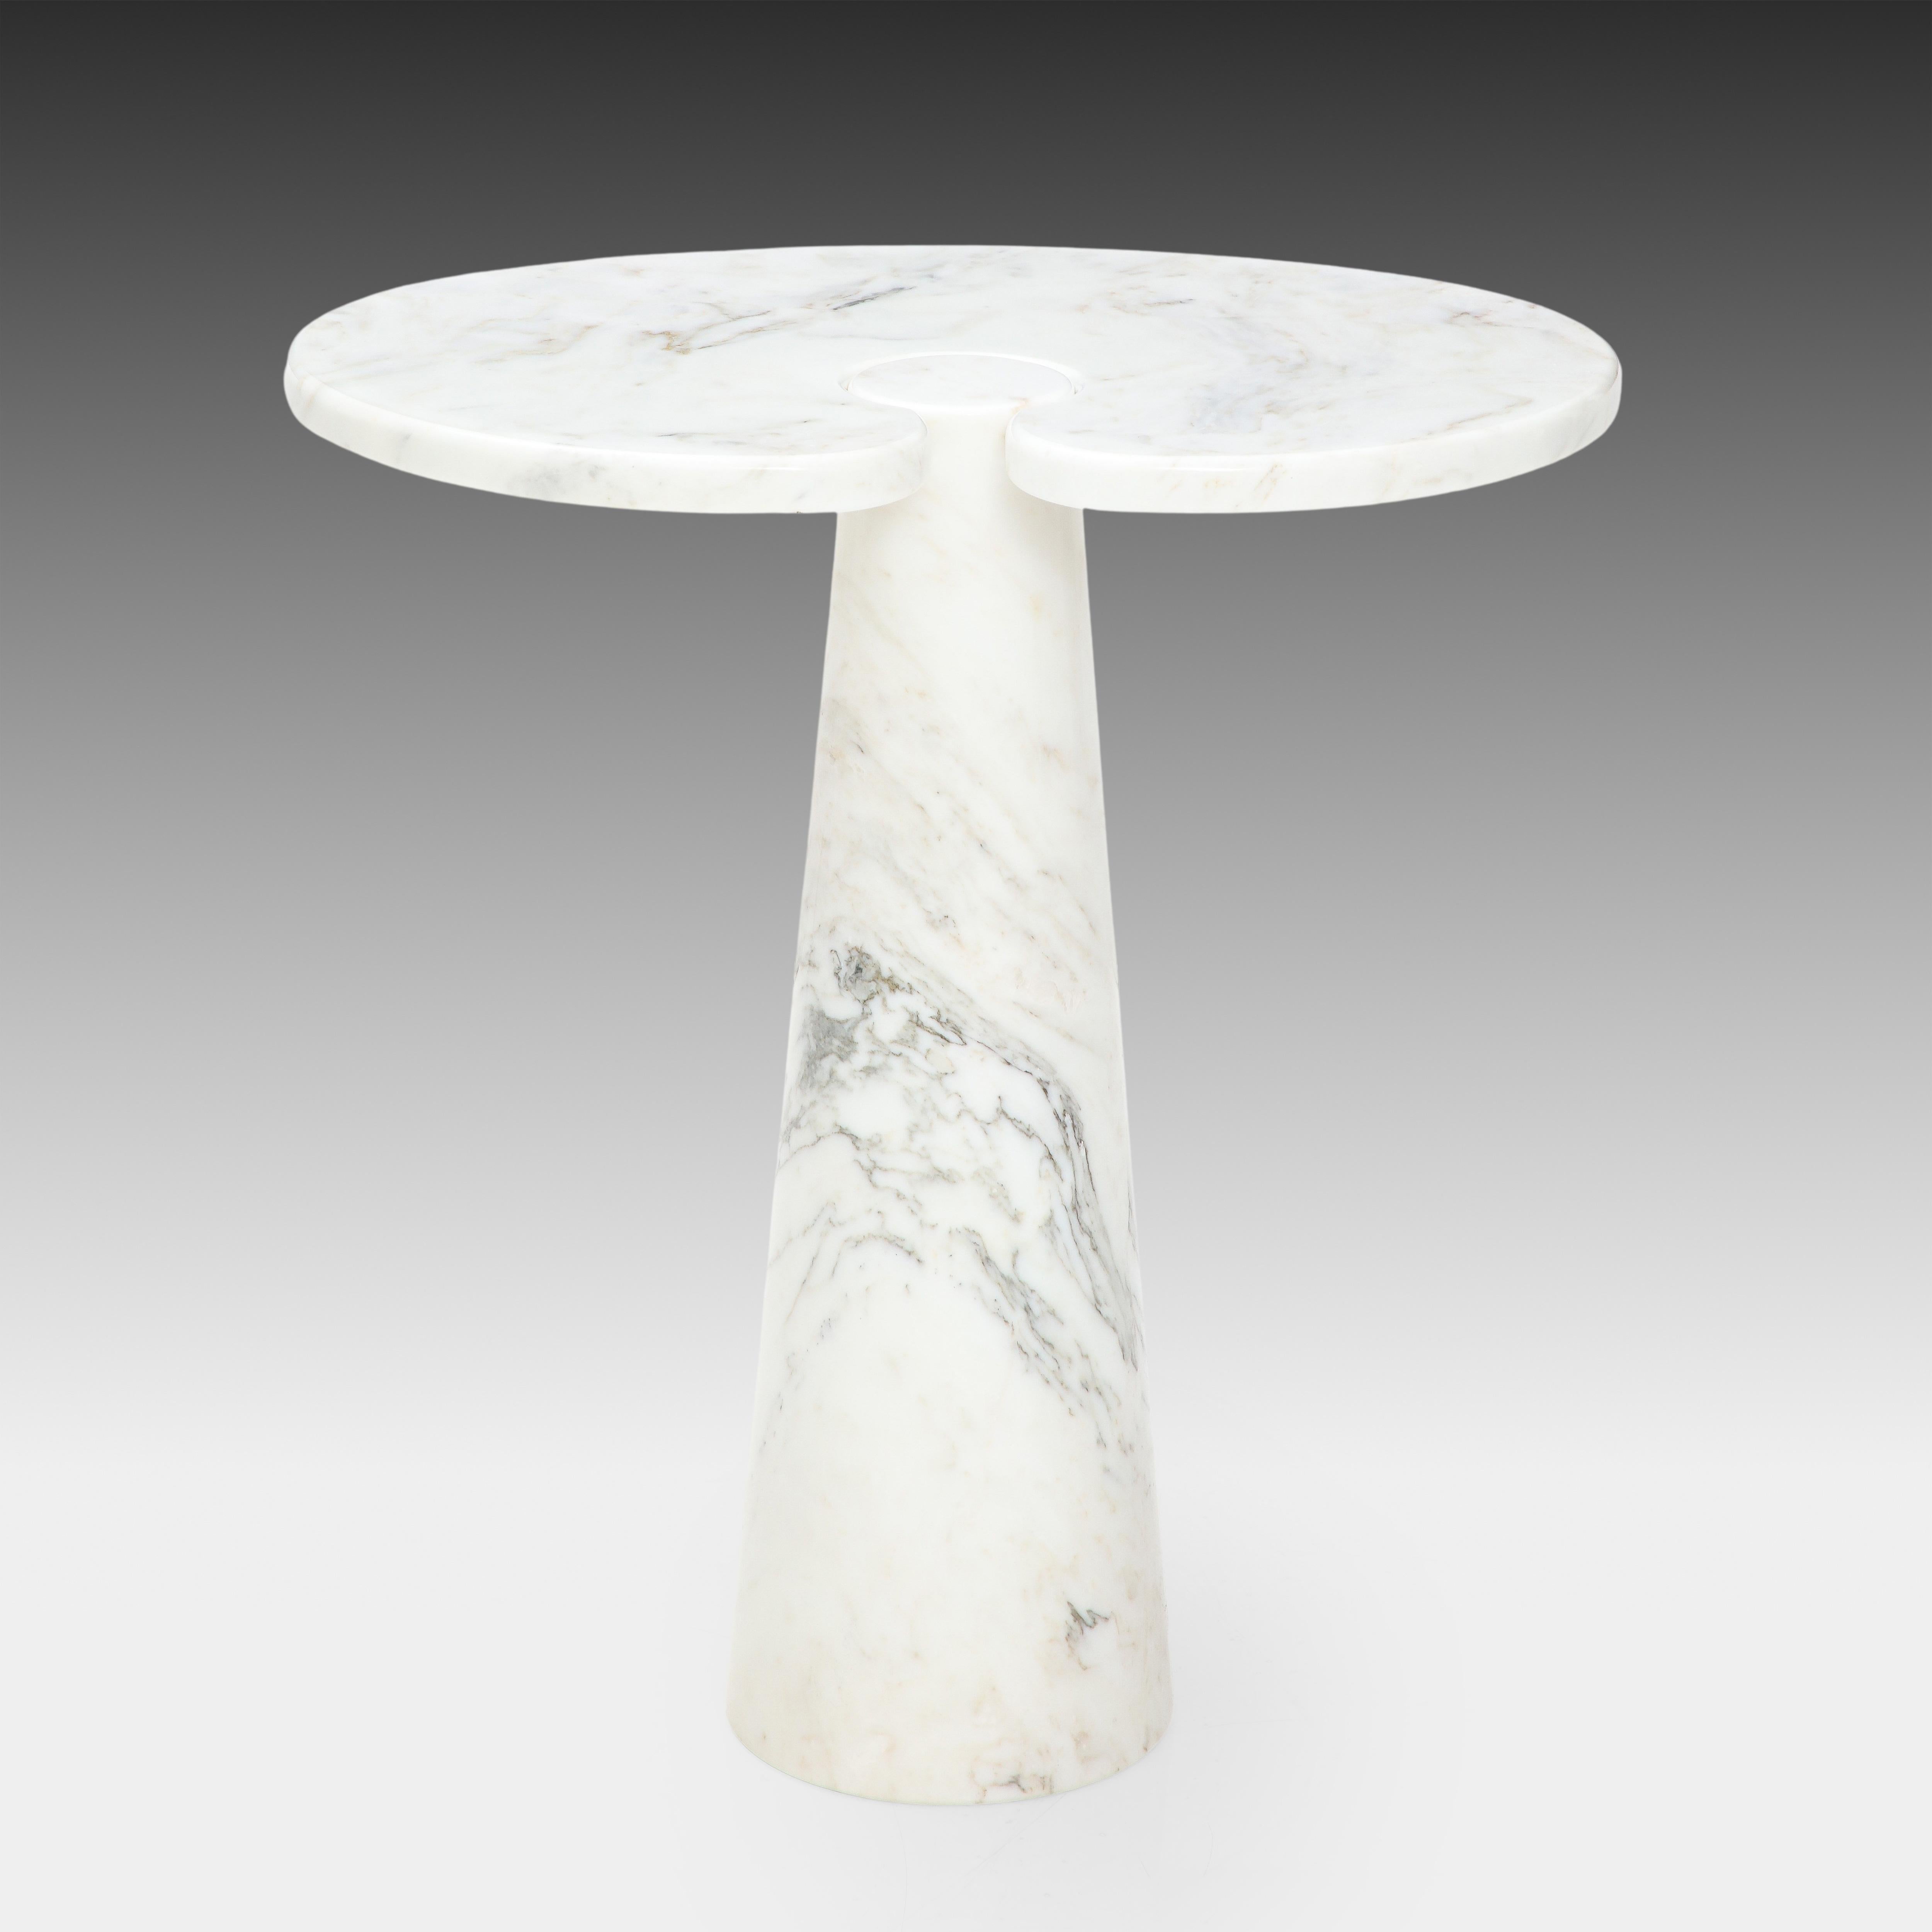 Designed by Angelo Mangiarotti for Skipper from the 'Eros' series, rare pair of Carrara marble tall side tables or consoles with top fitted on a conical base. These elegantly organic tables have beautiful subtle veining throughout. Original Skipper